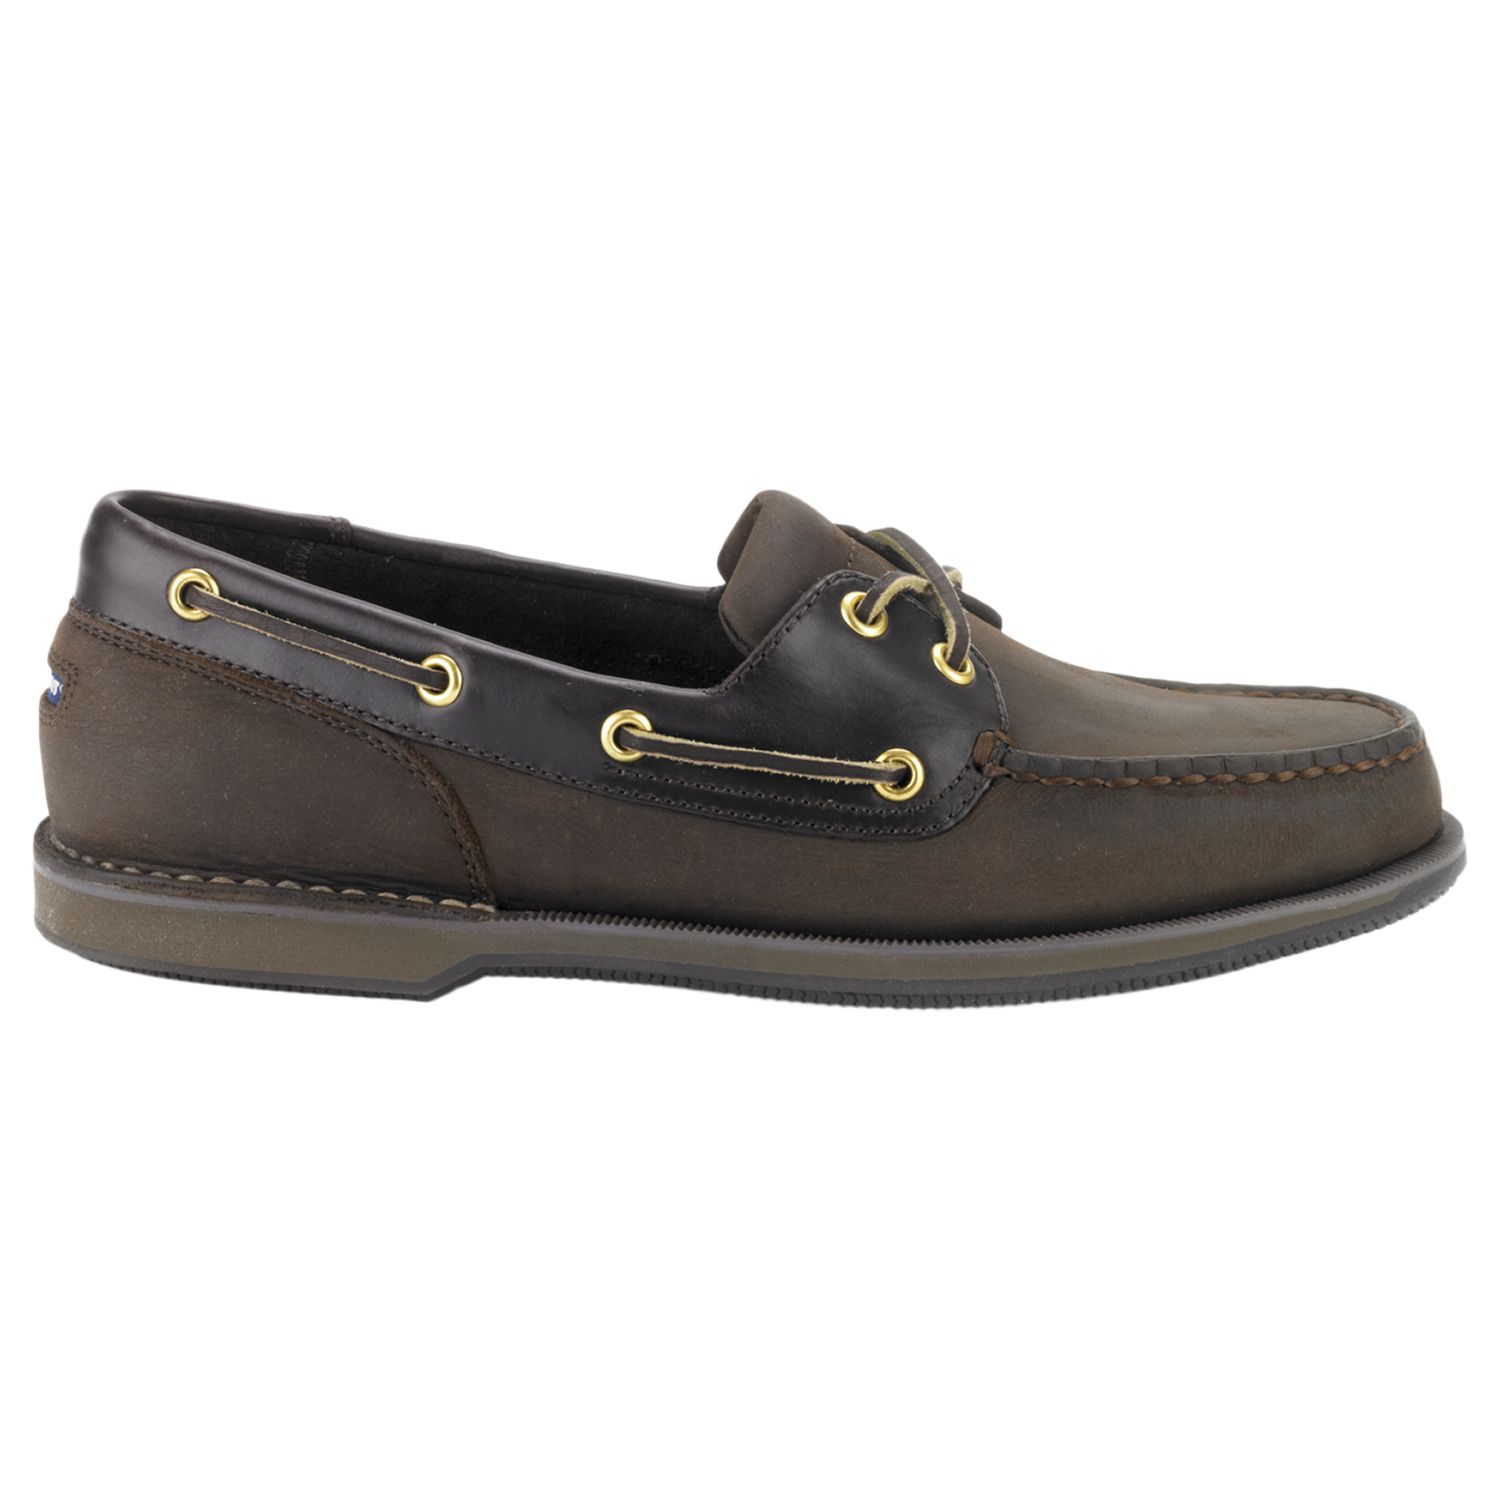 Rockport Perth Leather Boat Shoes, Chocolate at John Lewis & Partners